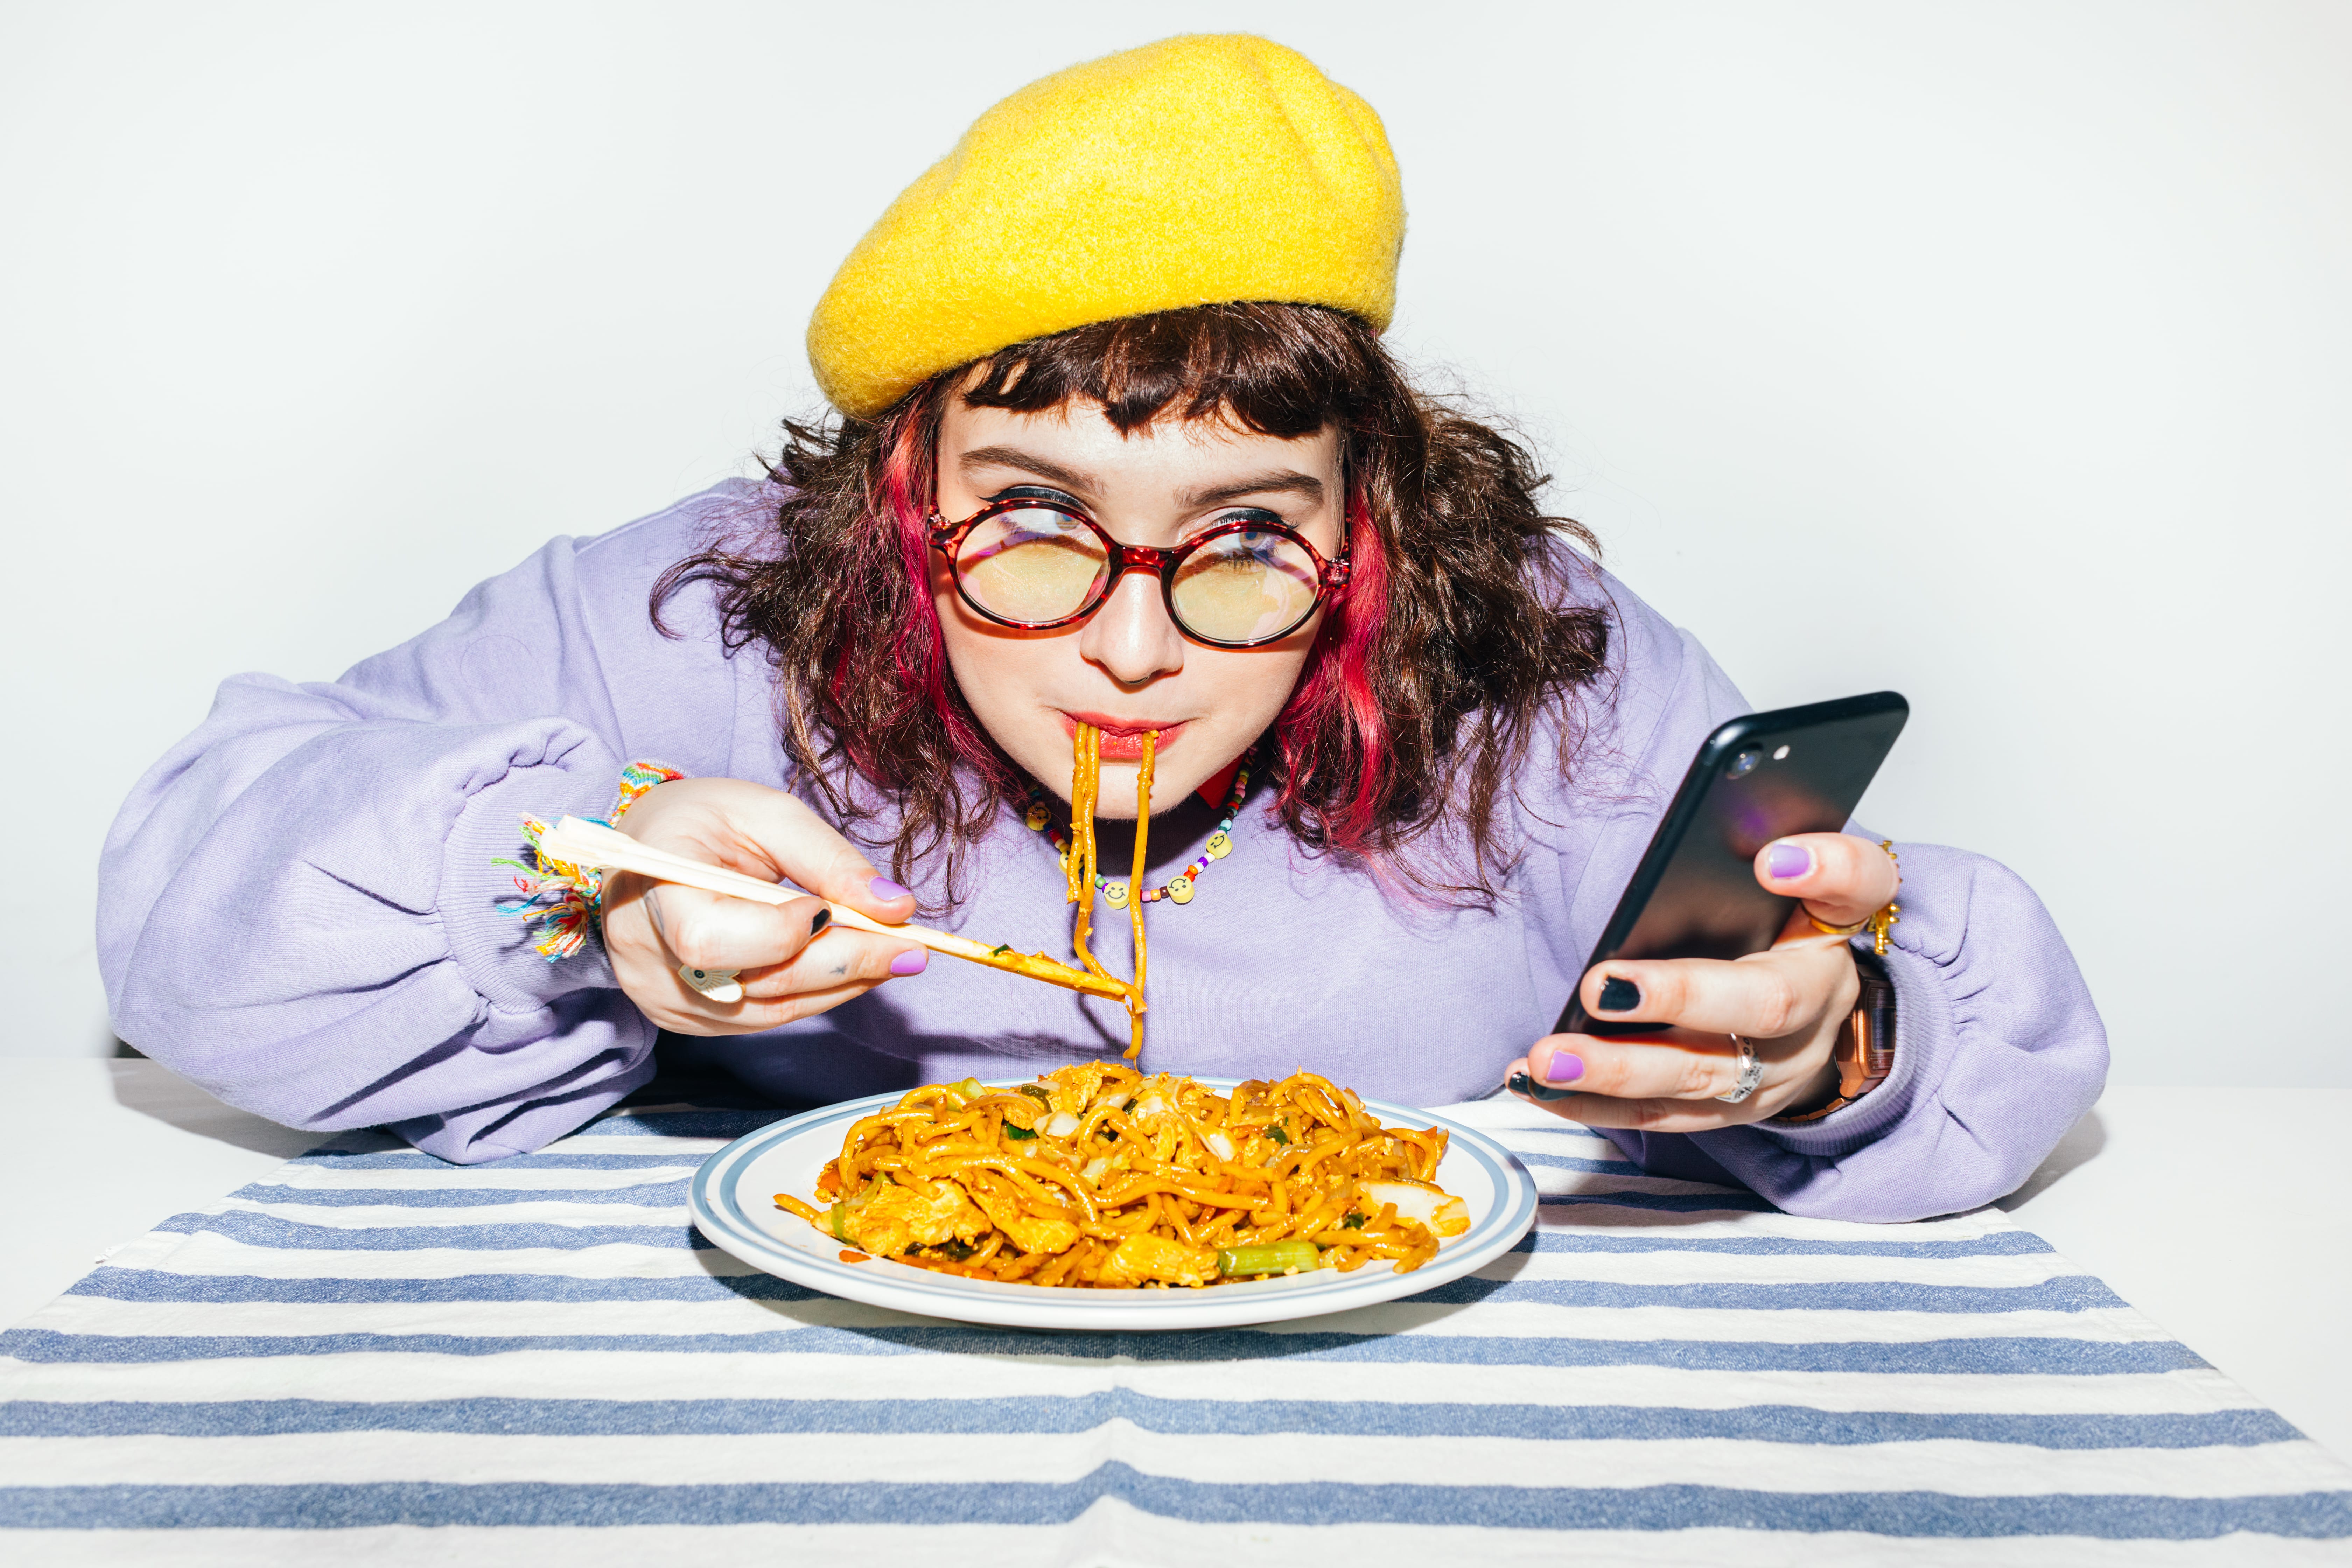 A portrait of a cute young plus size girl eating chinese food and using a mobile phone, texting